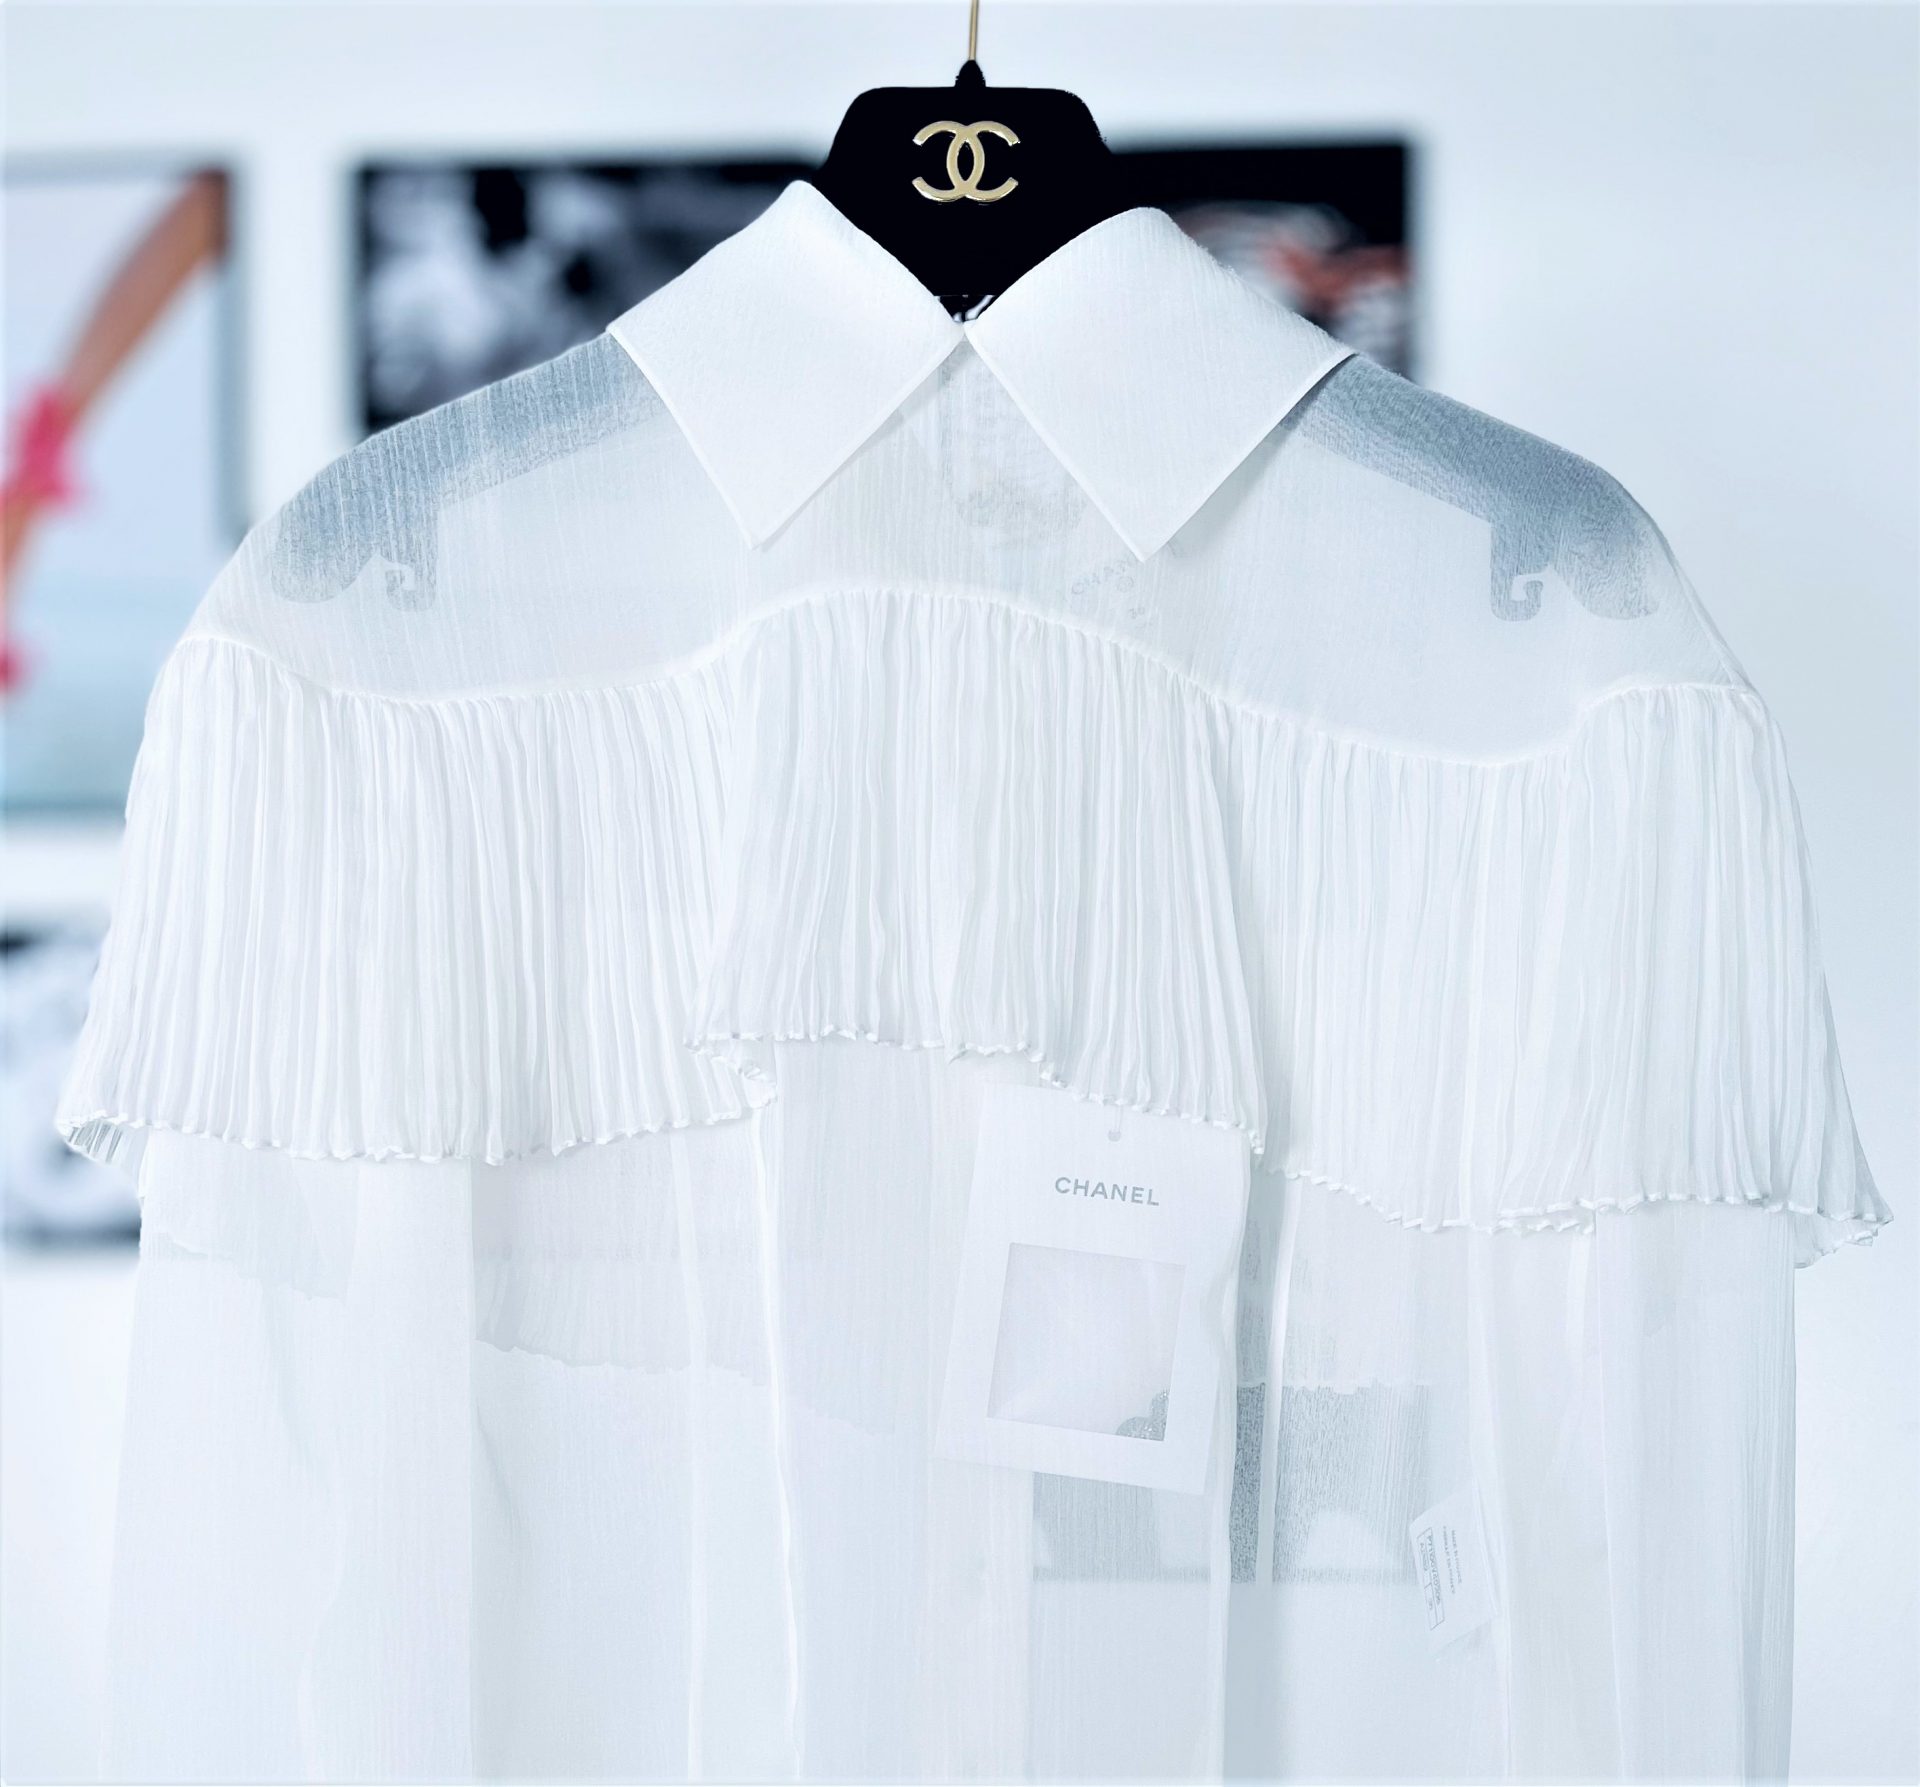 Chanel White Silk Sleeveless Pleated Bow Blouse - Chanel